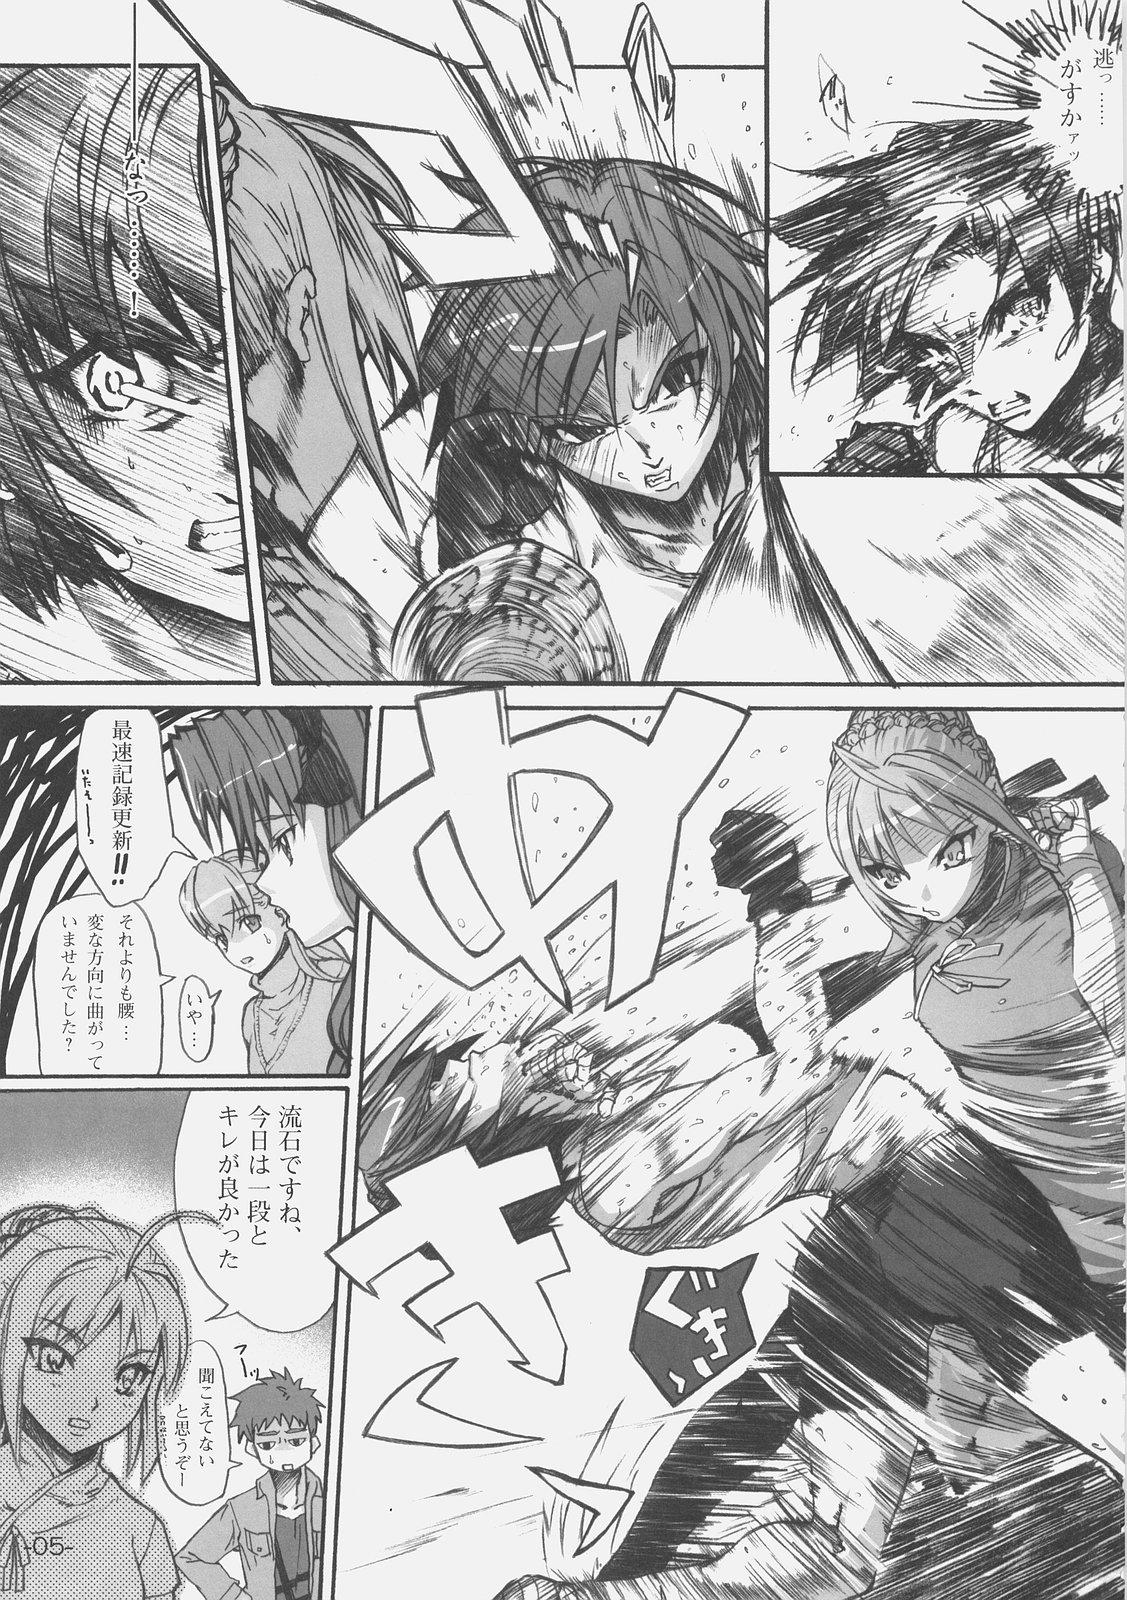 Vip FIRSTBLOOD - Fate stay night Fate hollow ataraxia Interracial Sex - Page 7